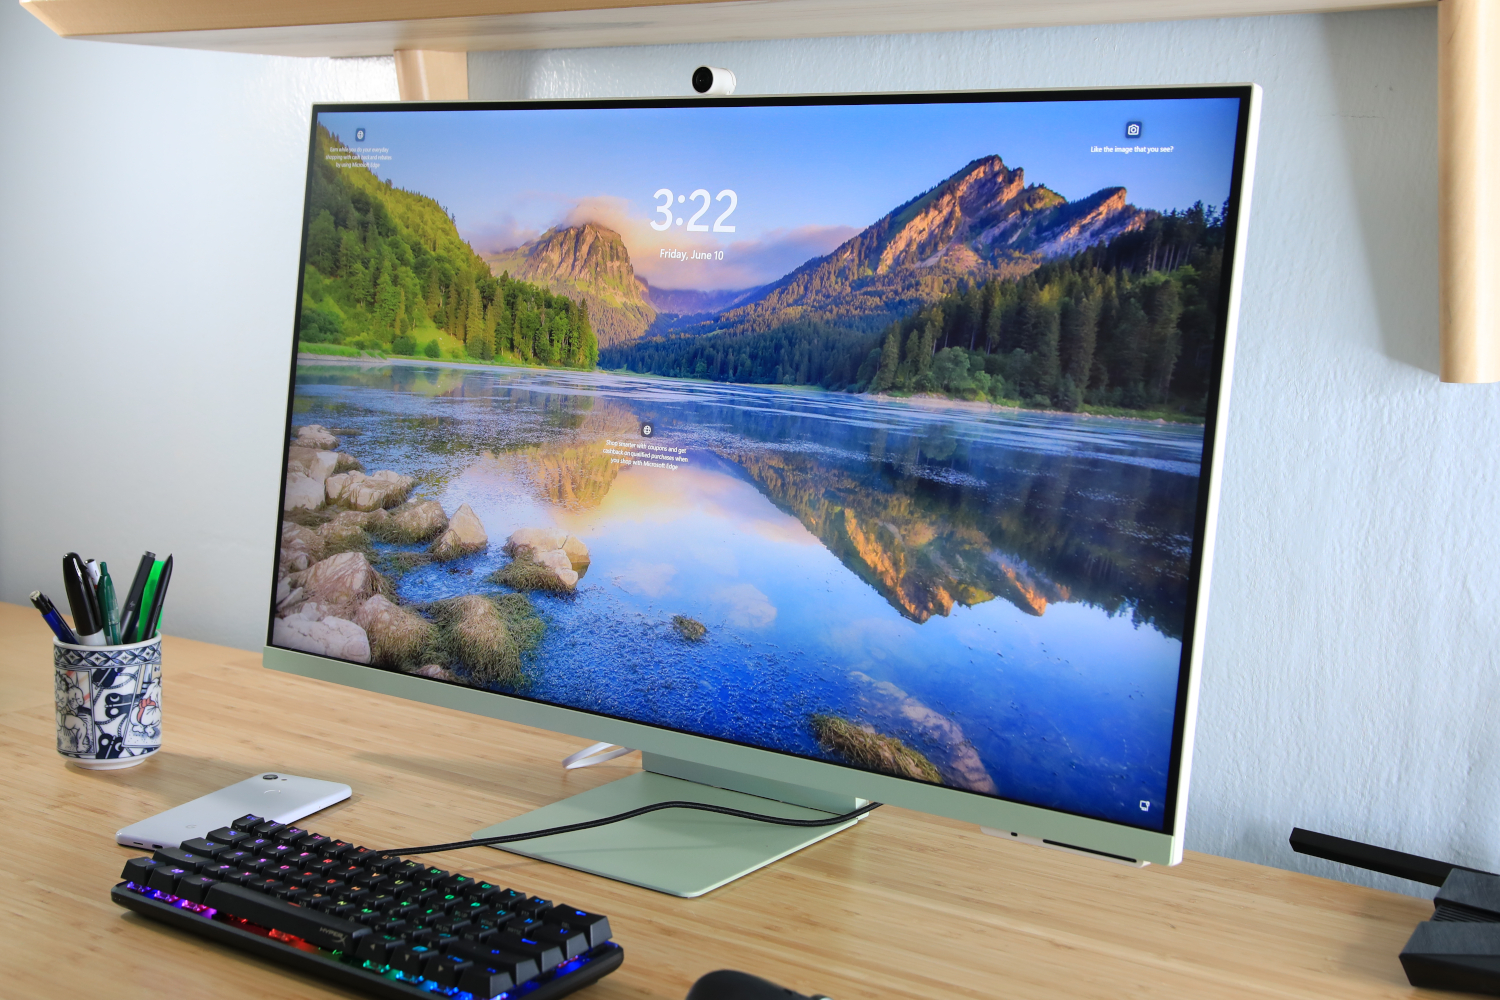 Samsung M8 Smart Monitor - Best 4K Display for Entertainment